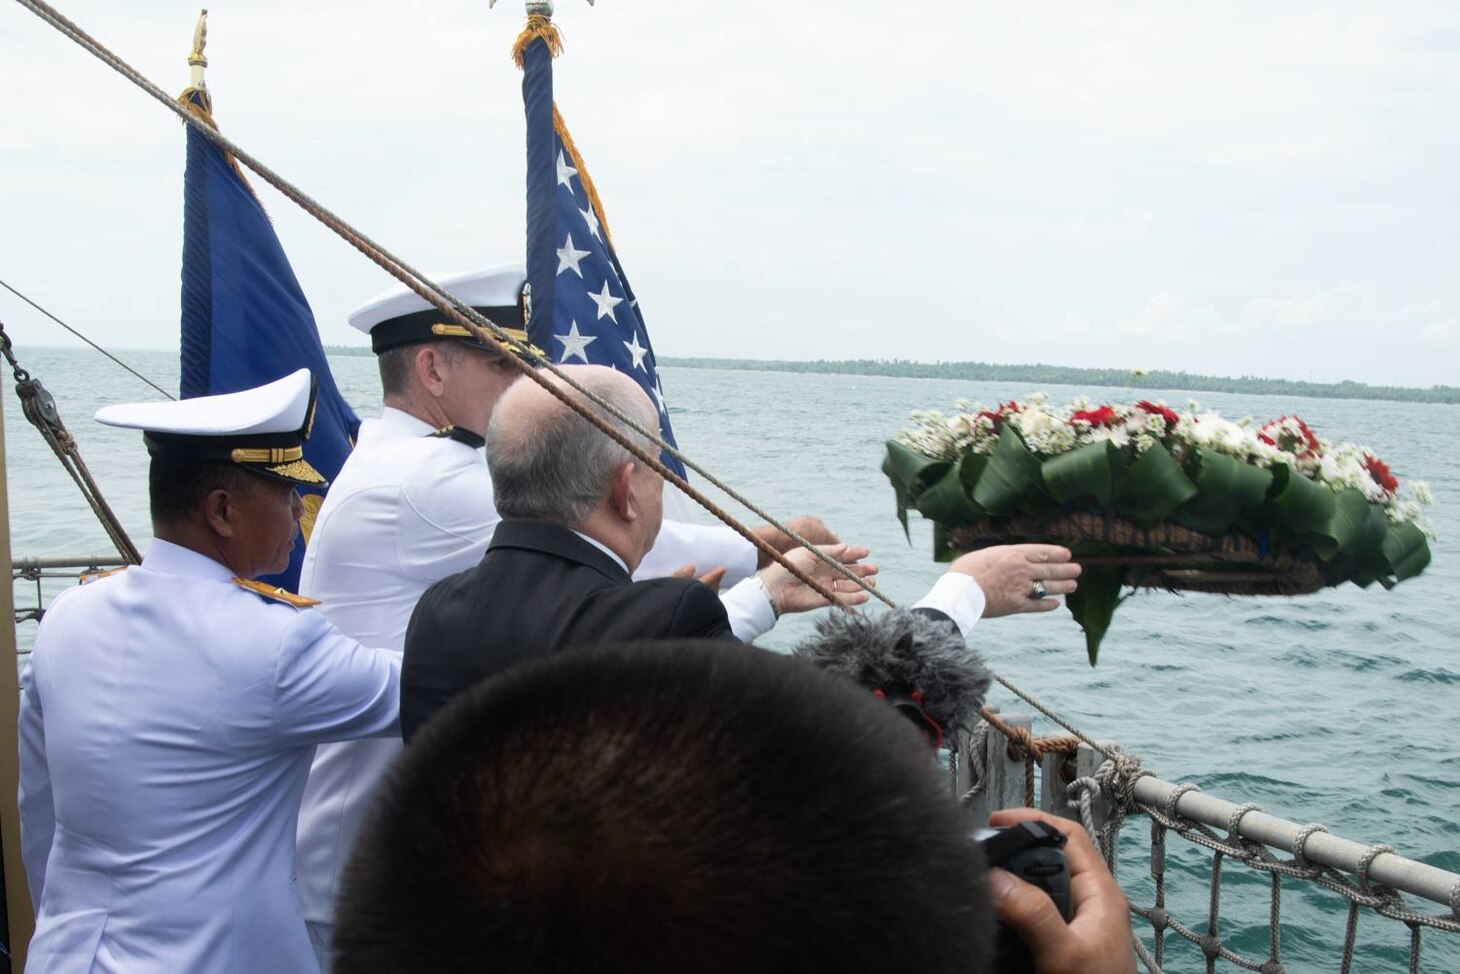 The ceremony was held to honor the American and Australian crews of USS Houston (CA 30) and HMAS Perth (D 29) that lost their lives in battle against the Japanese Imperial Navy during World War II.